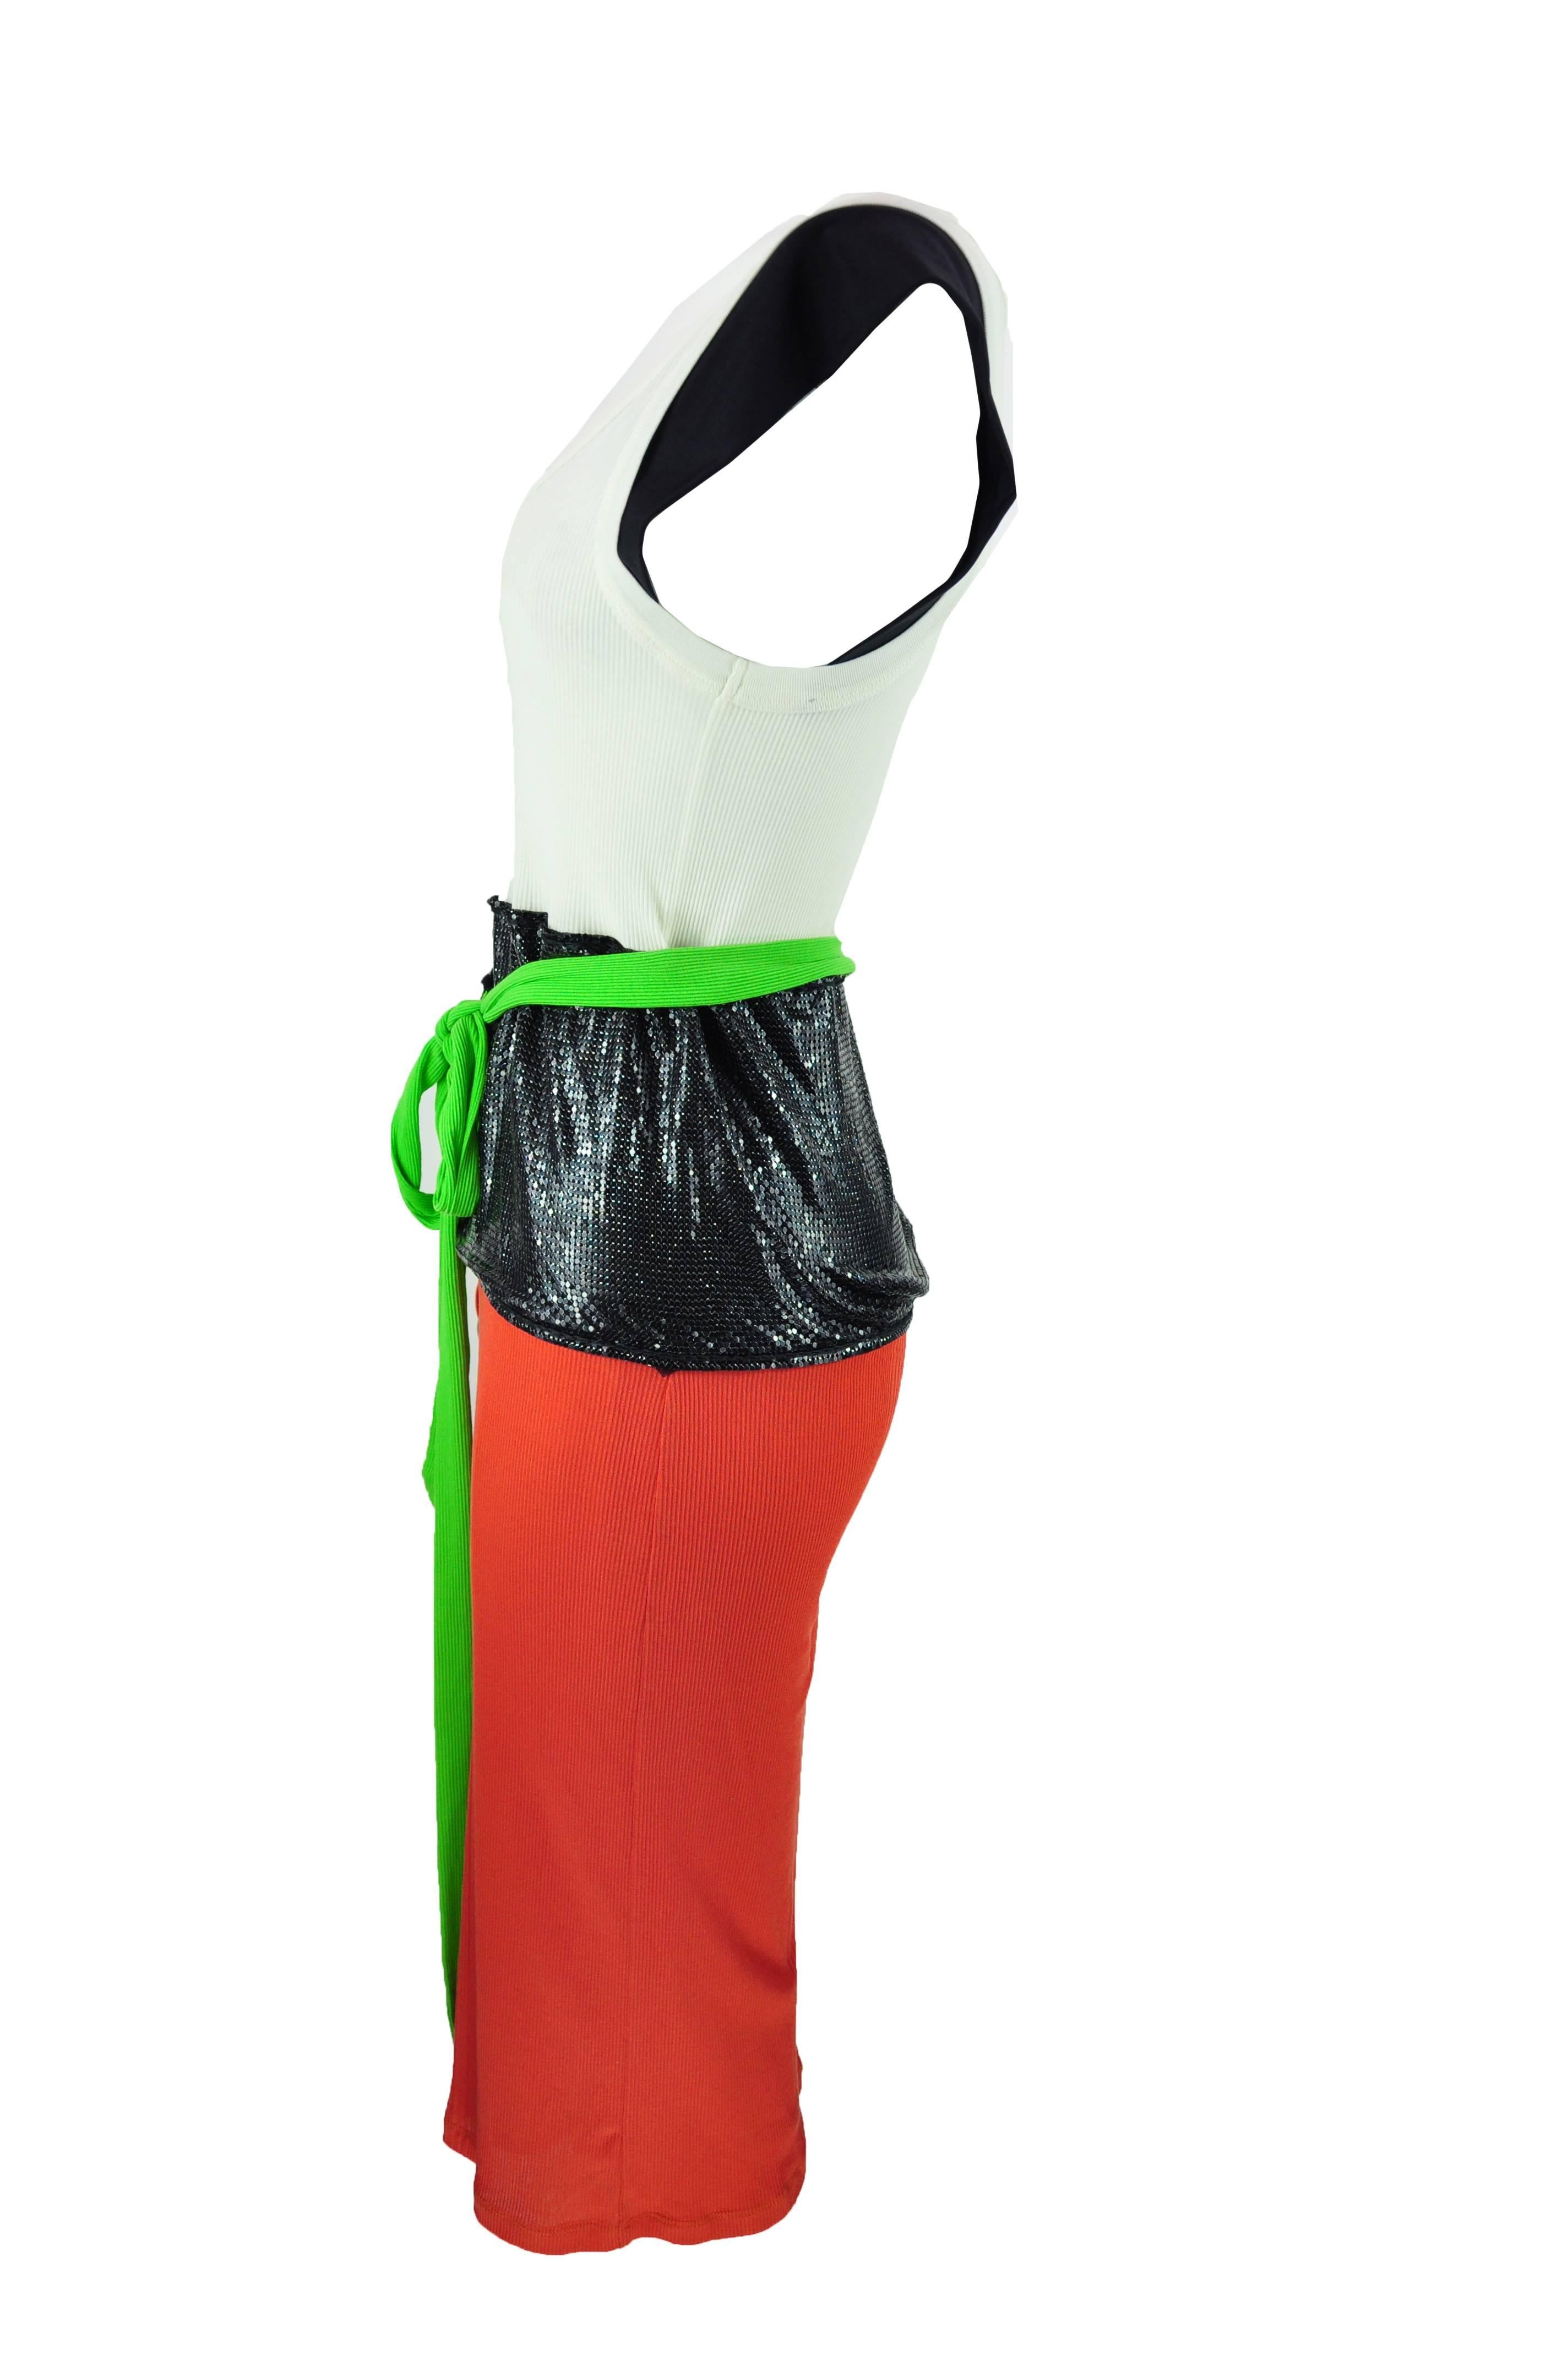 This dress is tailored with different elements. It features black cap sleeves white top and an attached red skirt wrapped around with black chain mail and green ties at waist.  The skirt is lined. The size is medium.